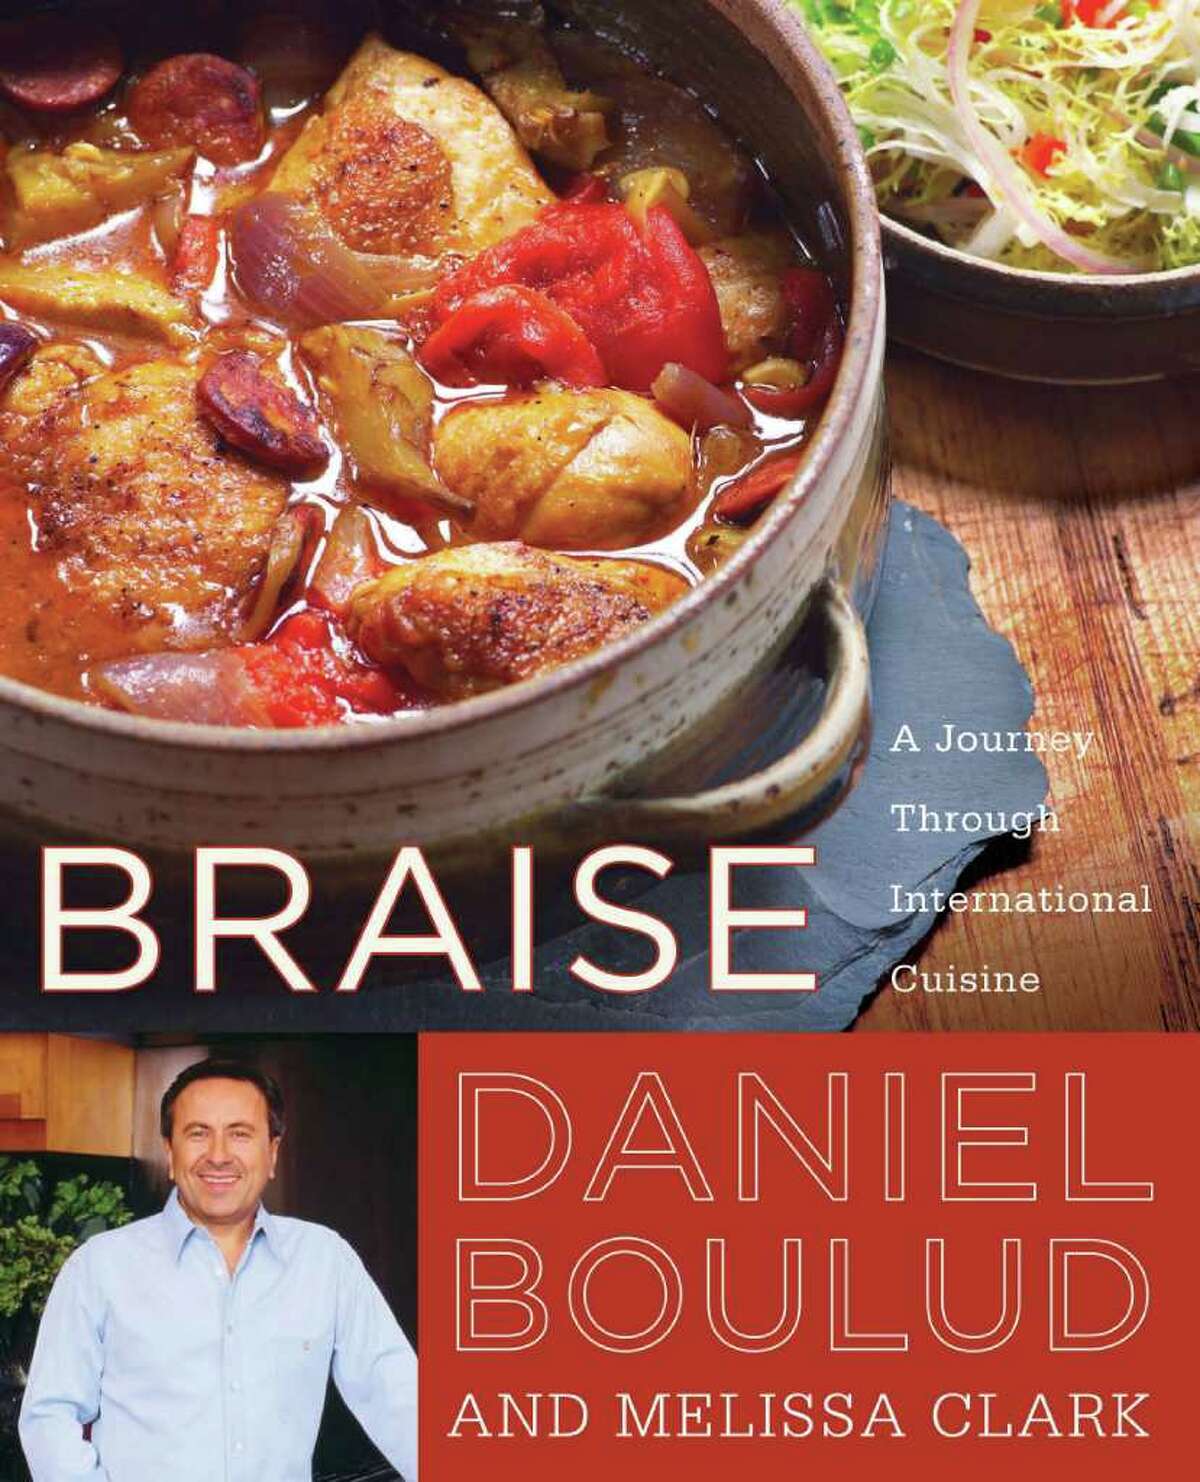 A taste of Daniel: An interview with Chef Daniel Boulud